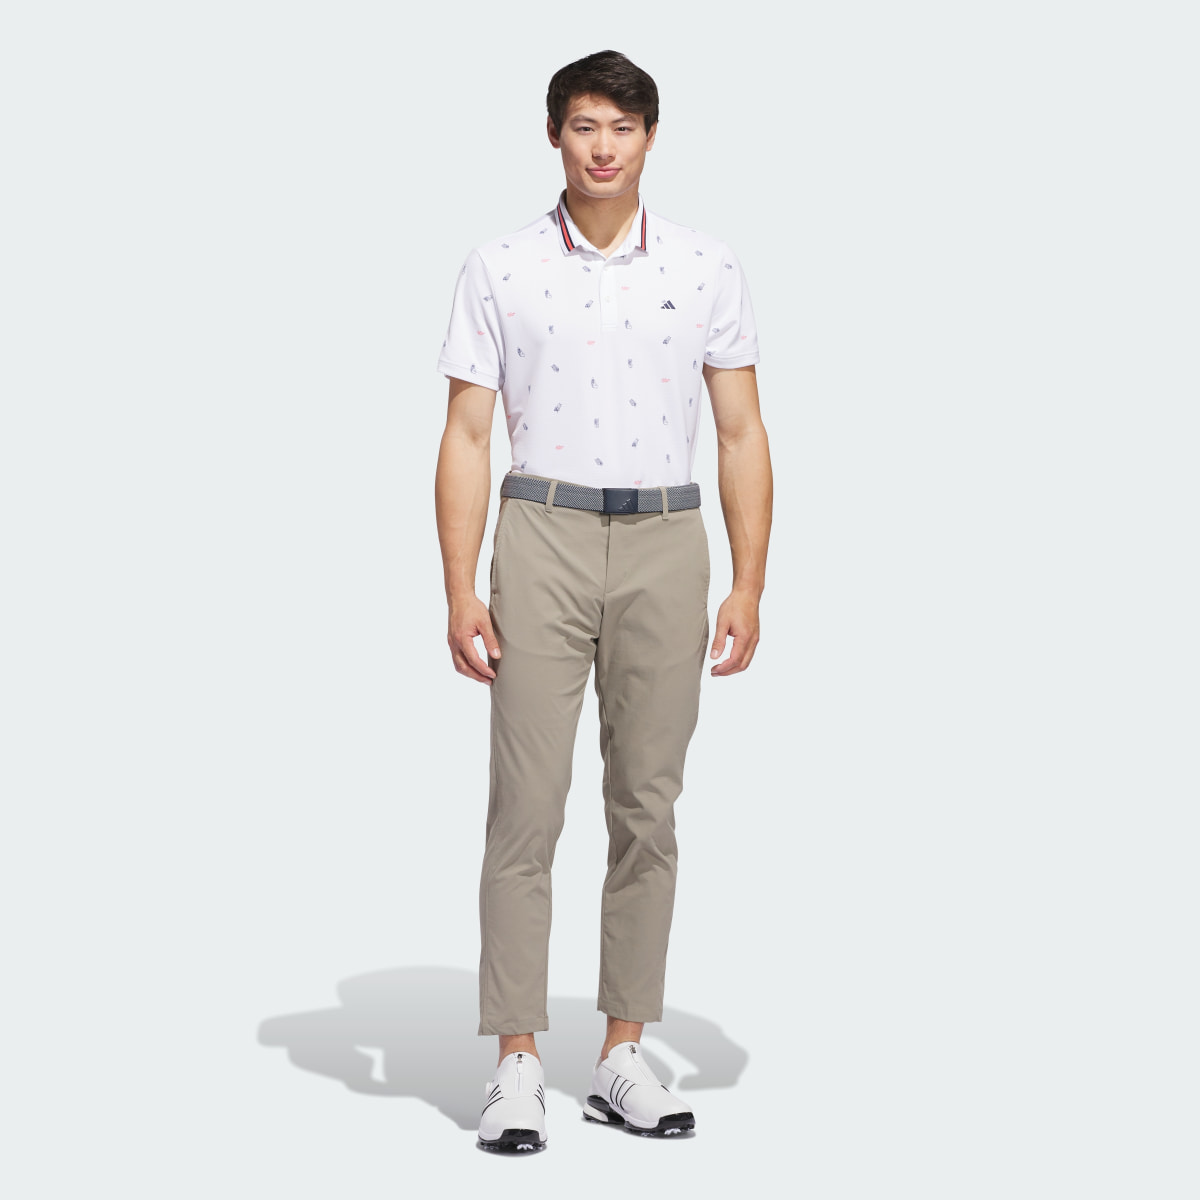 Adidas Ultimate365 Chino Trousers. 5